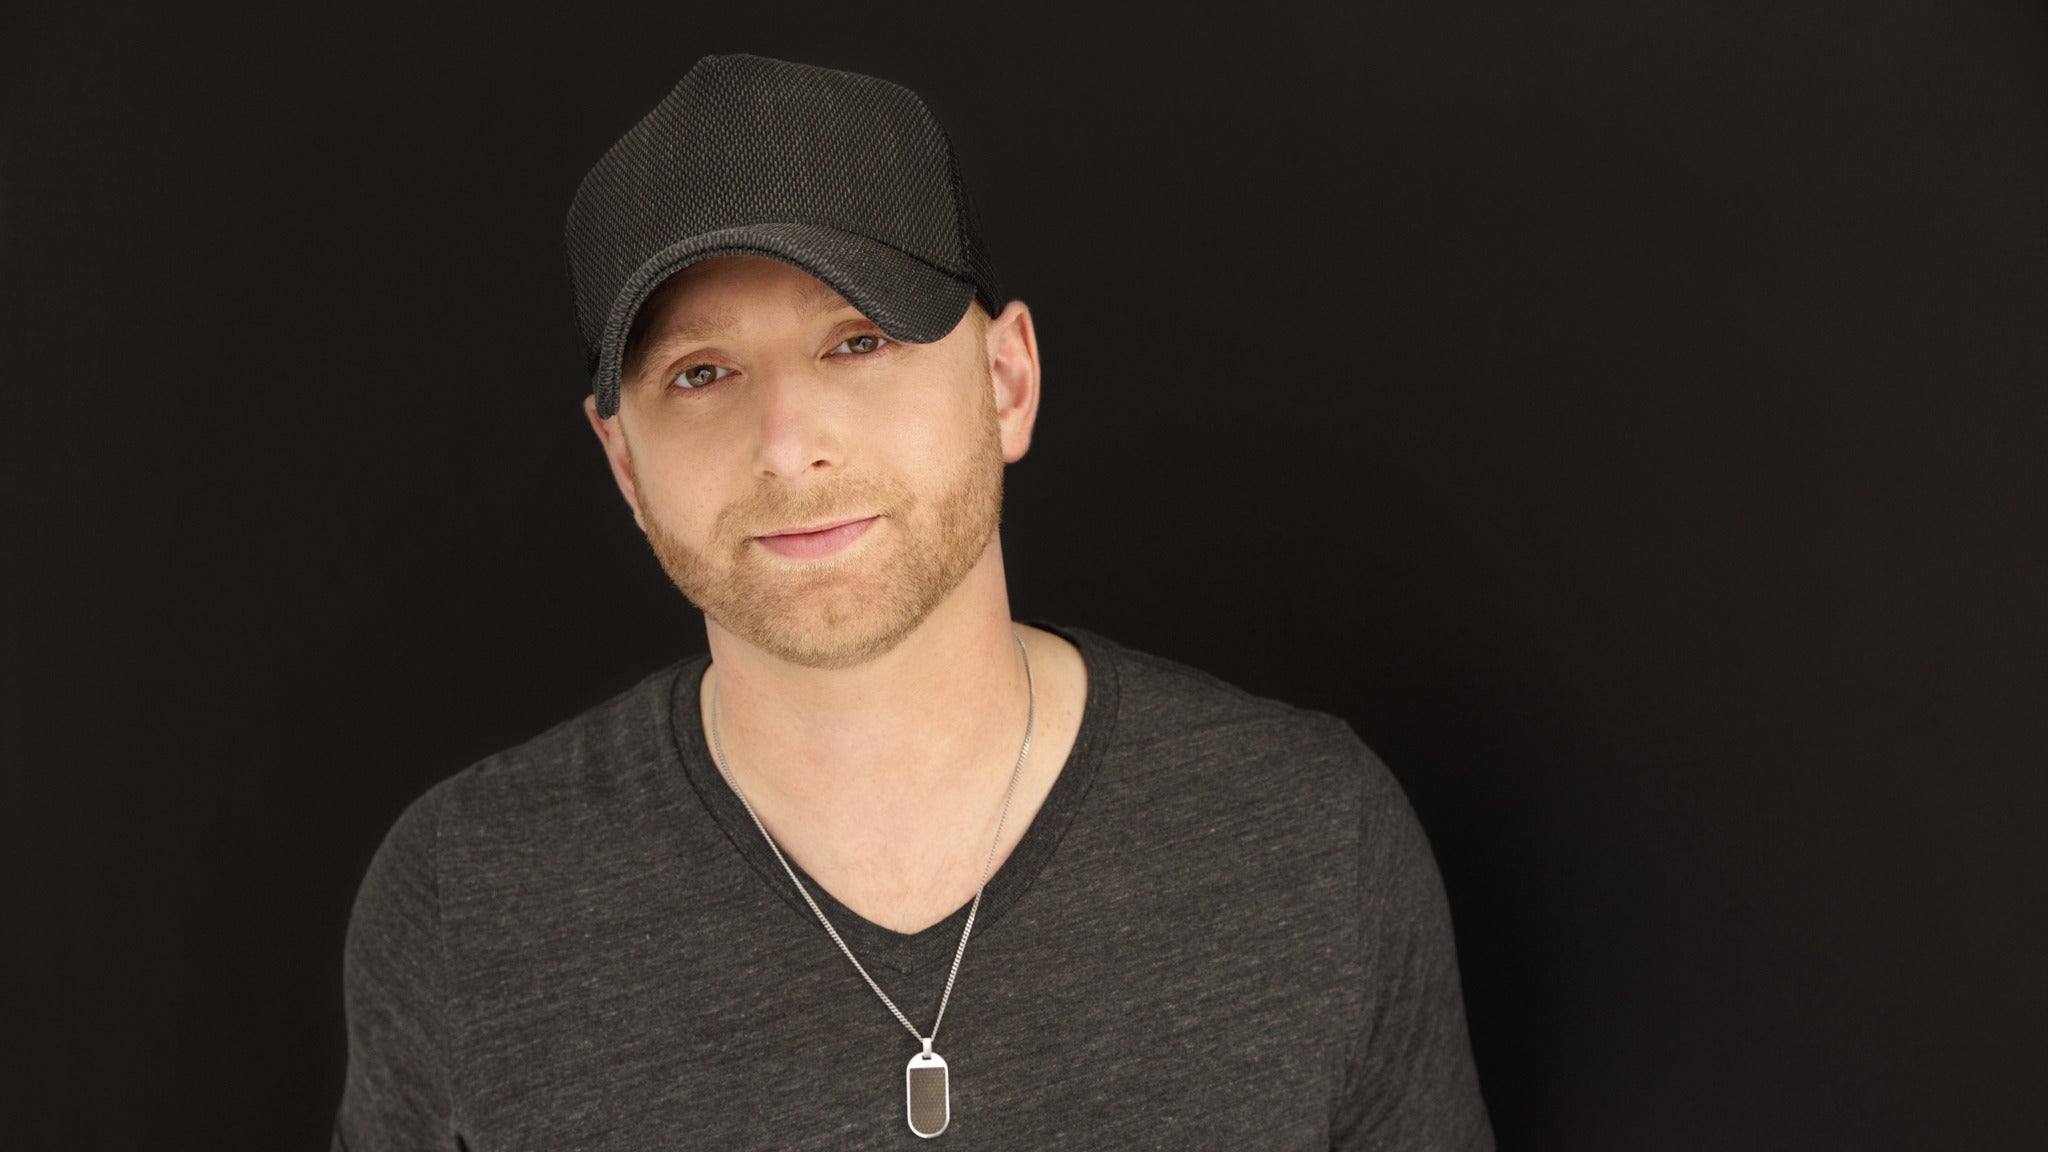 Tim Hicks Wreck This Town World Tour in Calgary event information